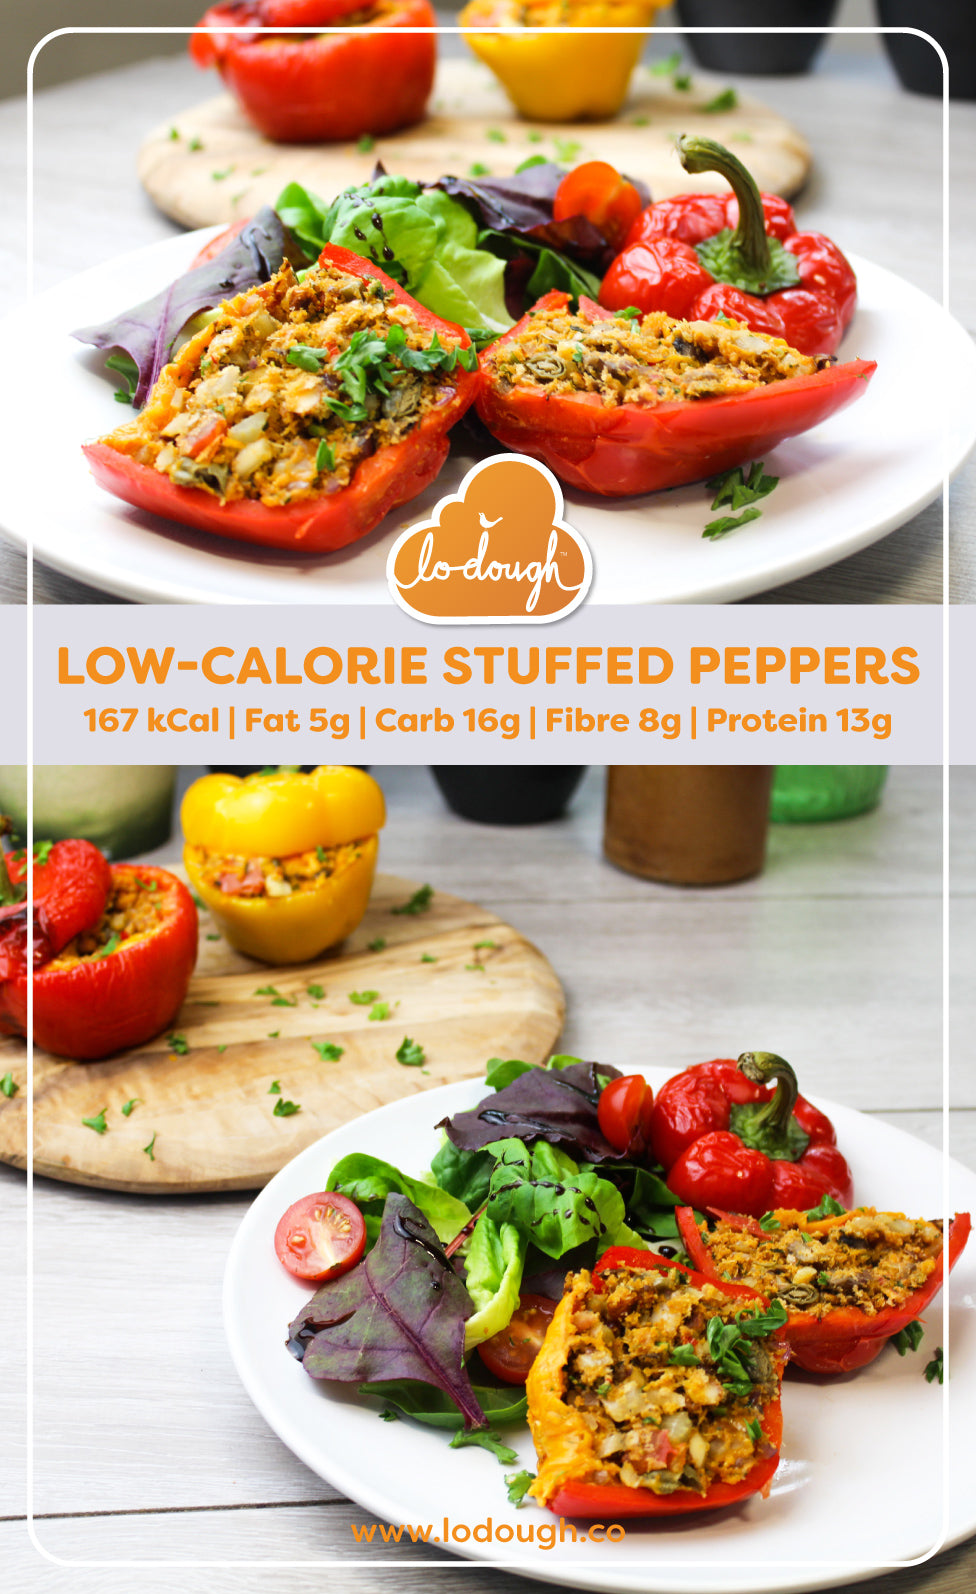 Low-Calorie Stuffed Peppers